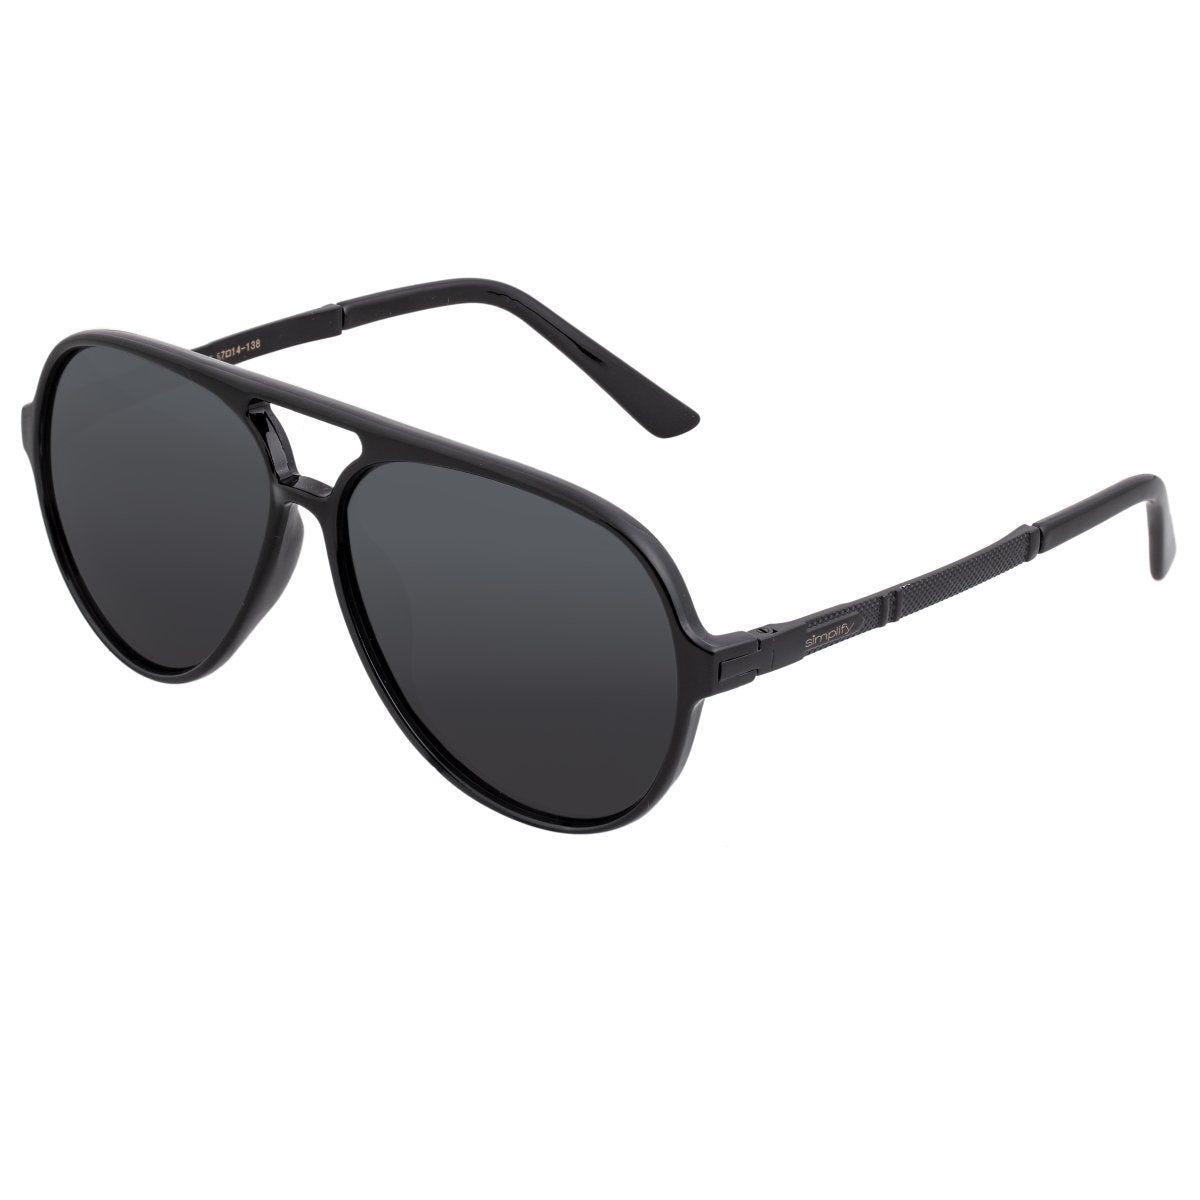 Black polarized sunglasses with ovular lenses and textured arms.